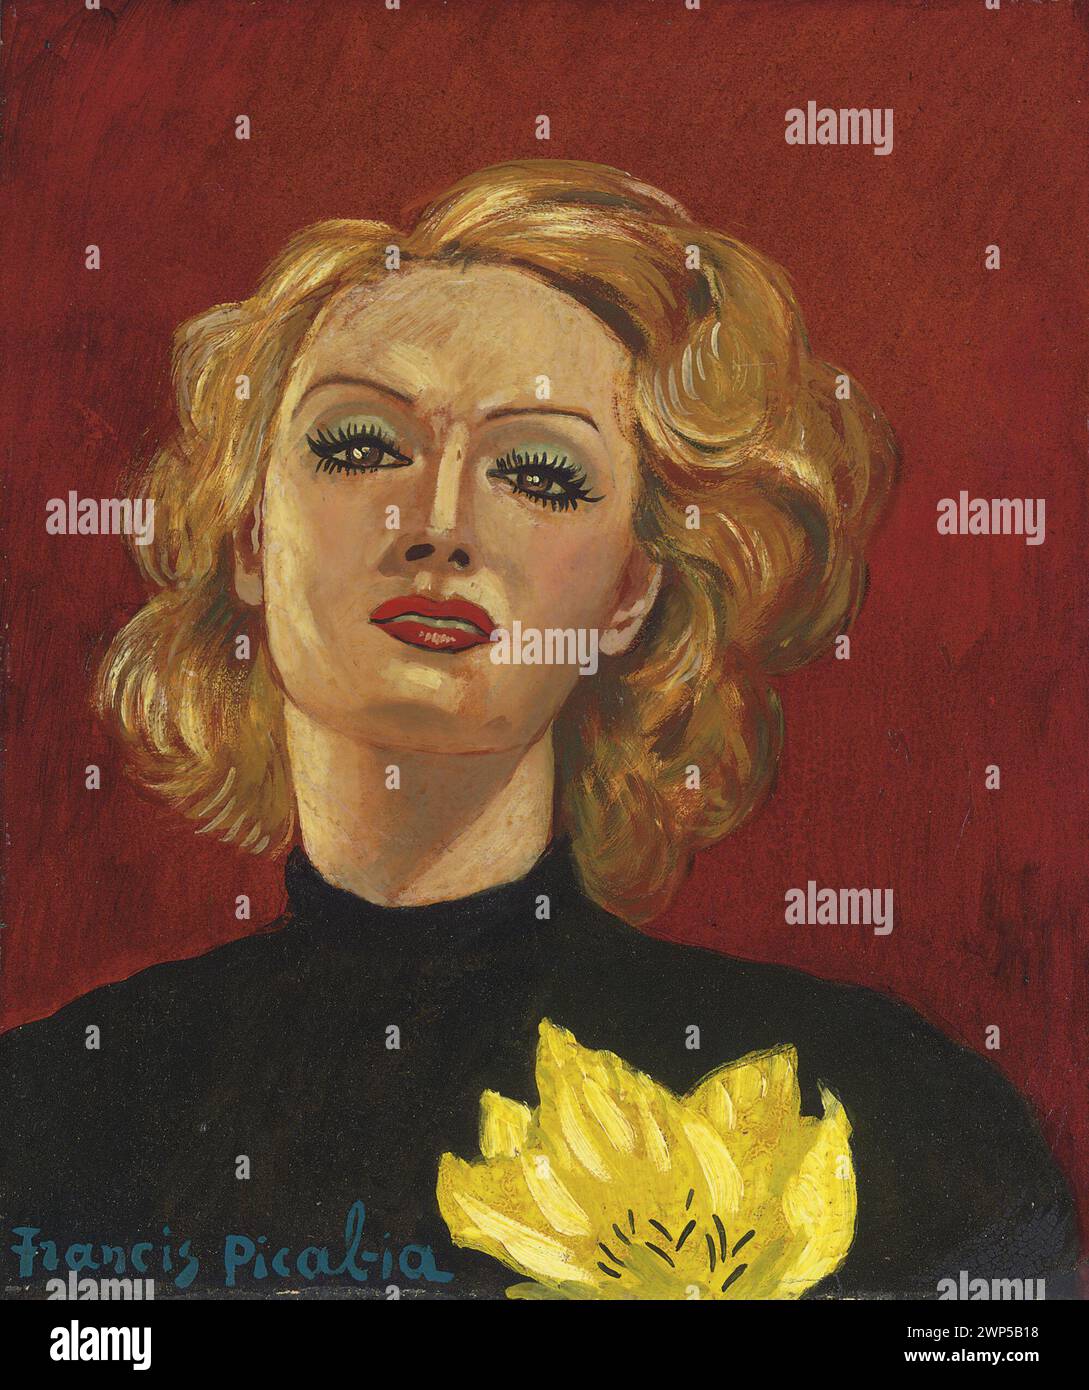 Femme à fleur jaune, Oil painting by French artist Francis Picabia. painted 1941-42 Stock Photo